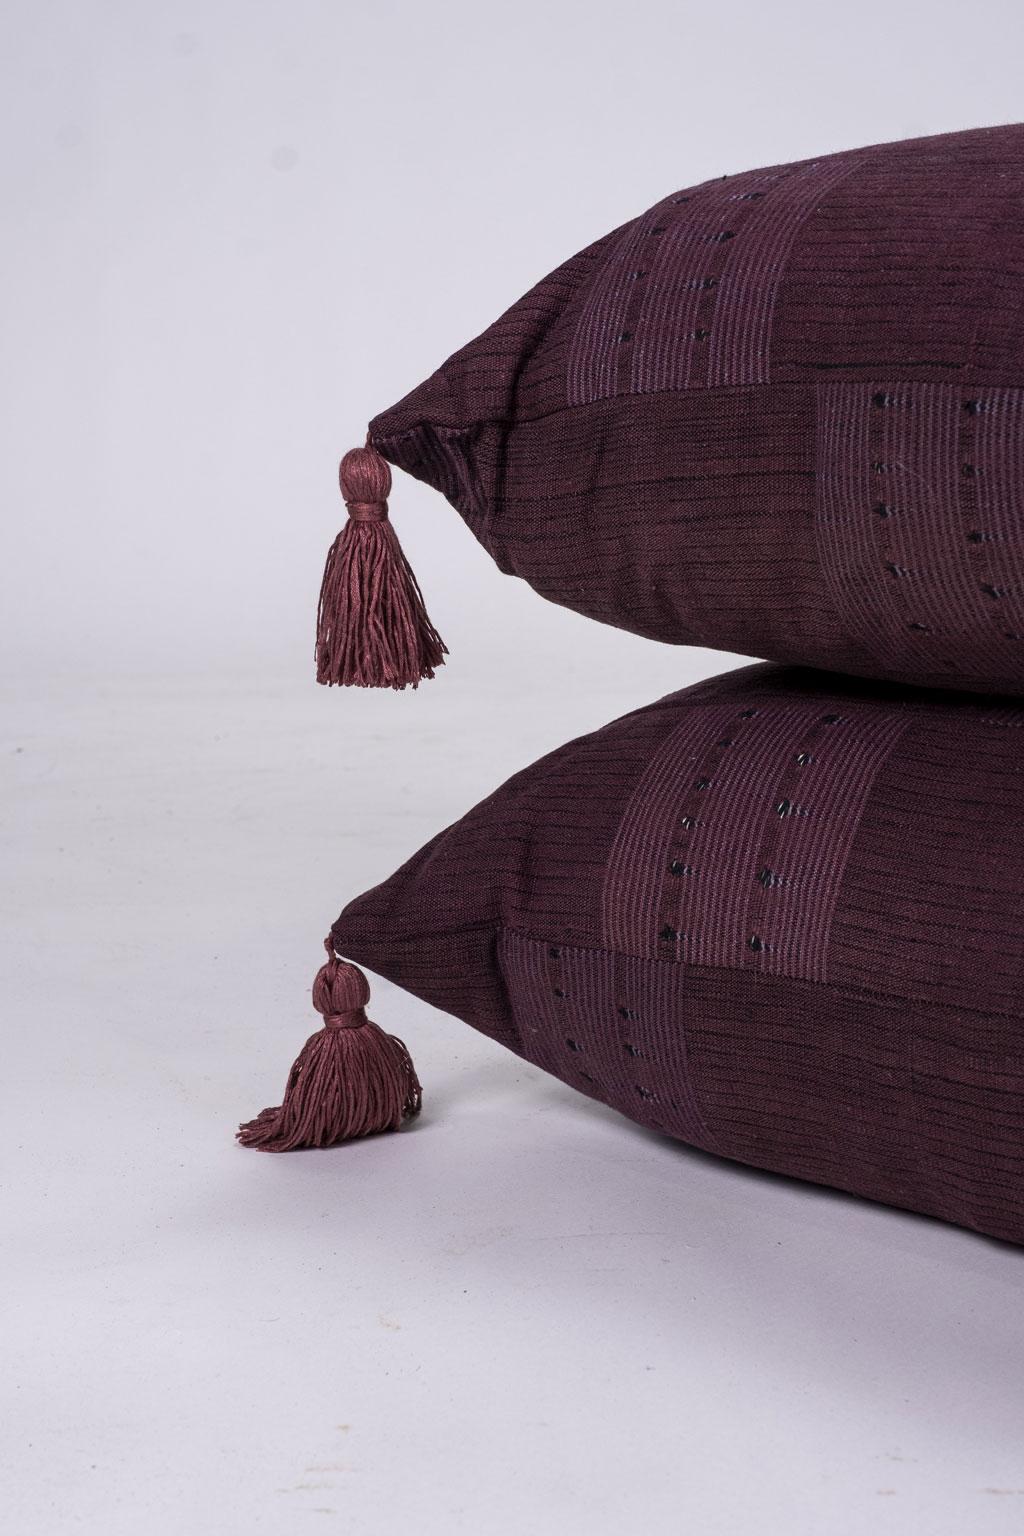 Contemporary Plum Color Cushions with Tassels